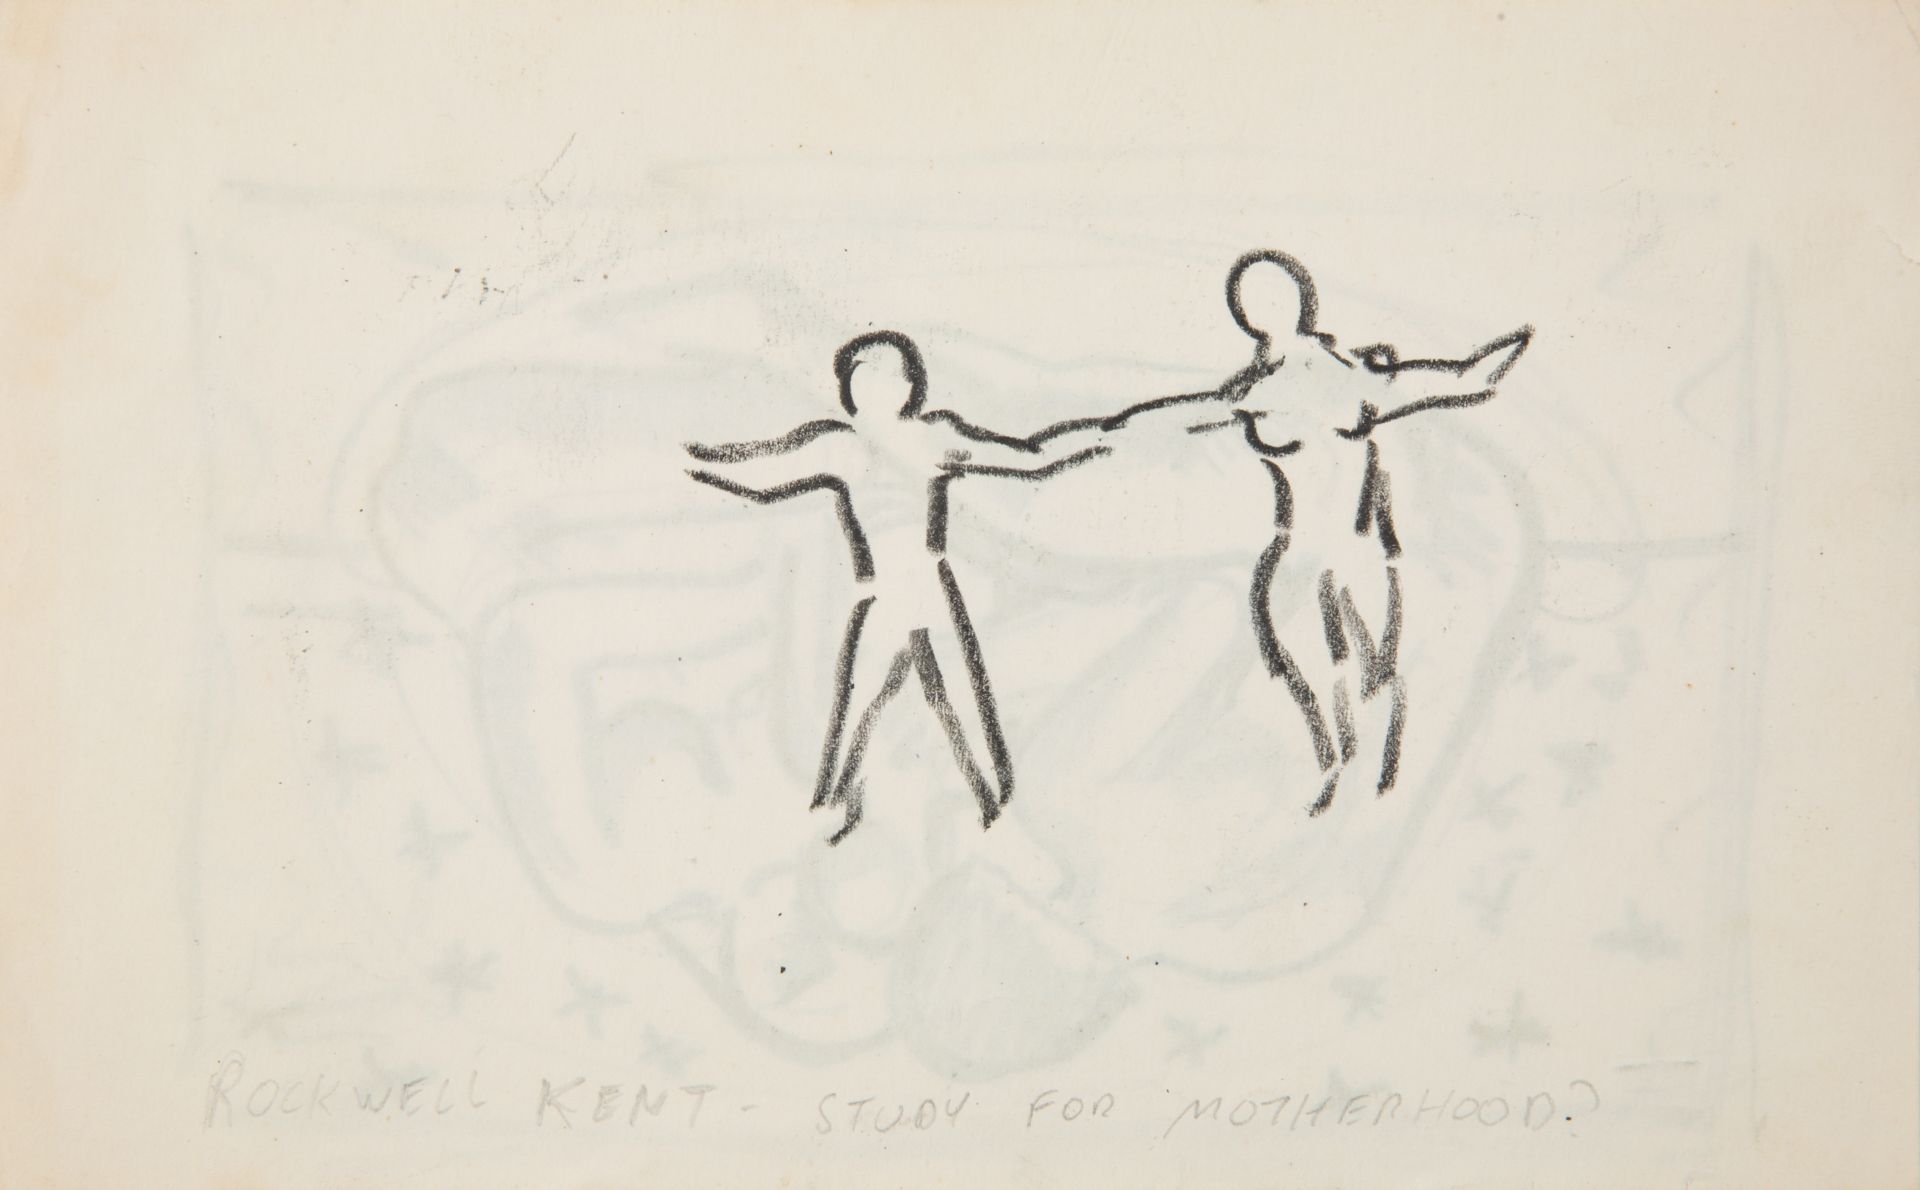 A DOUBLE SIDED DRAWING BY ROCKWELL KENT (AMERICAN 1882-1971) - Bild 2 aus 2